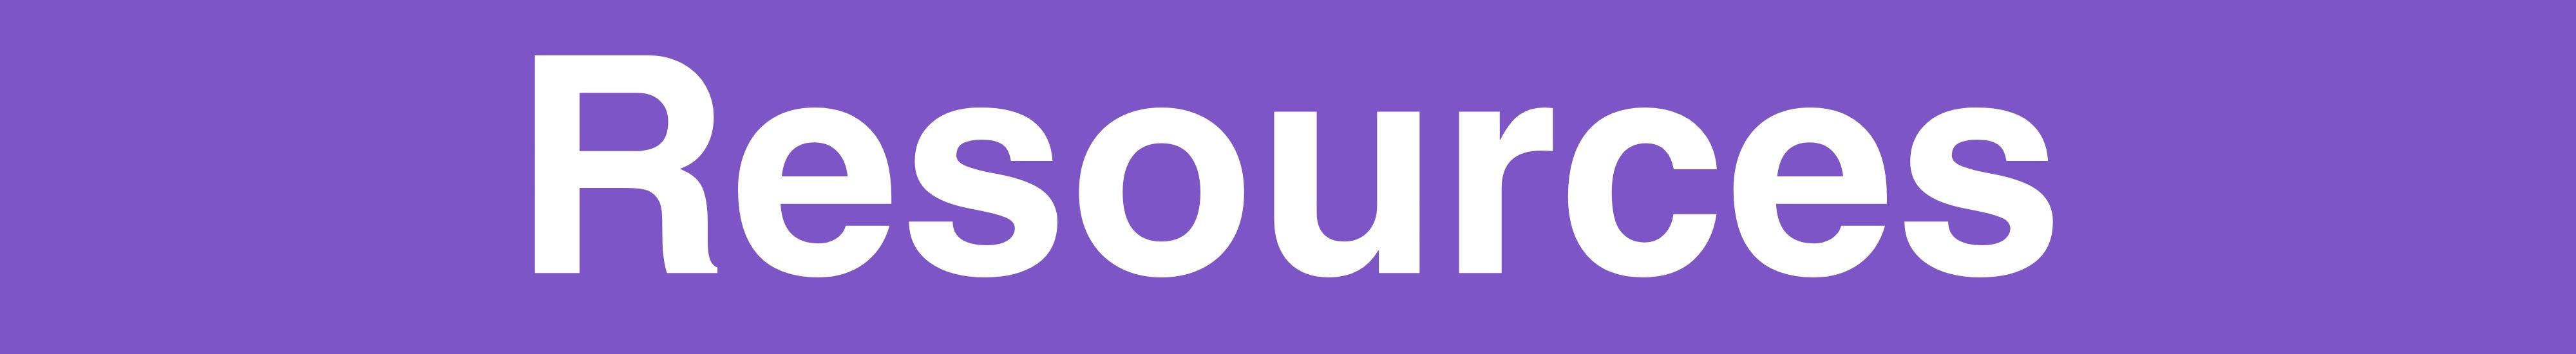 Resources written on a purple background